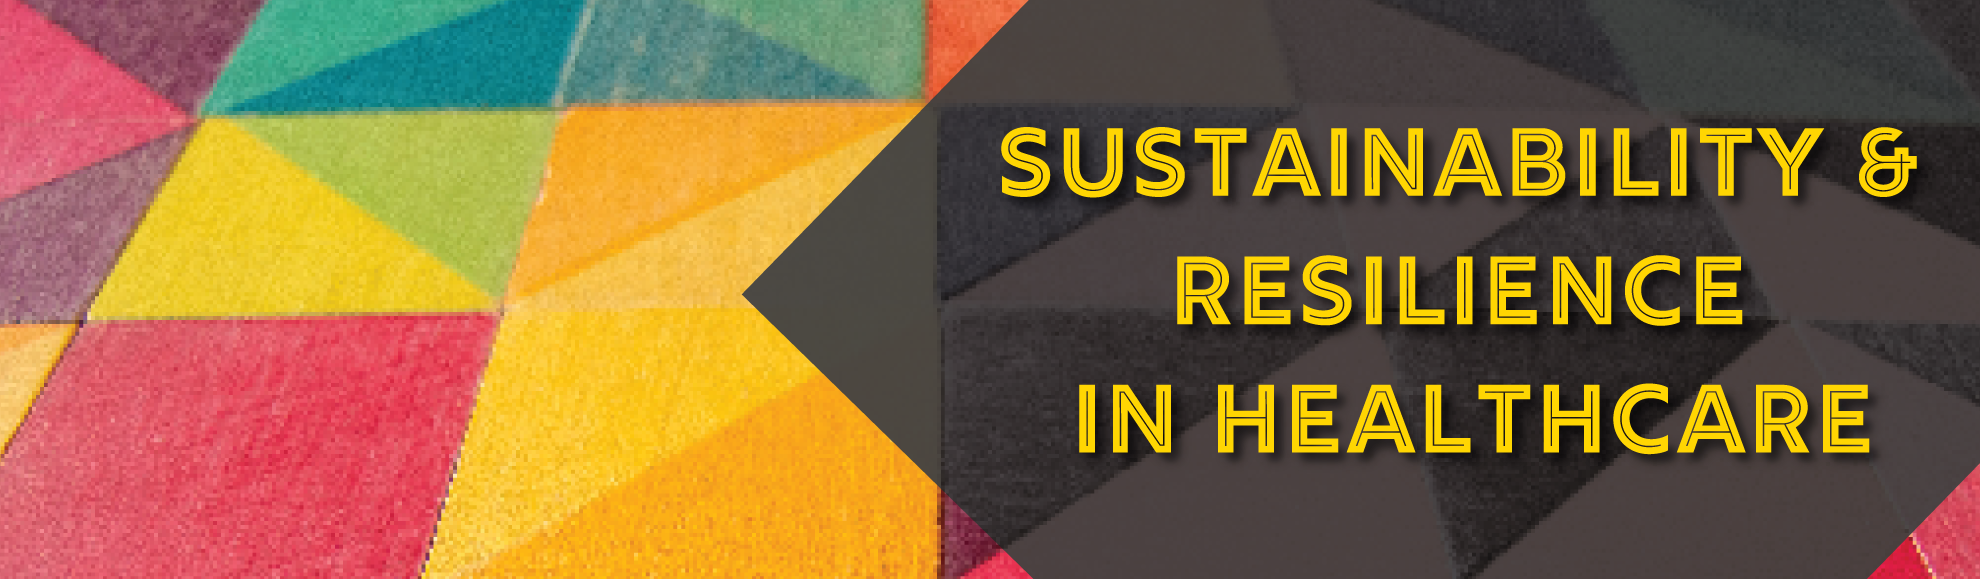 Sustainability & Resilience in Healthcare